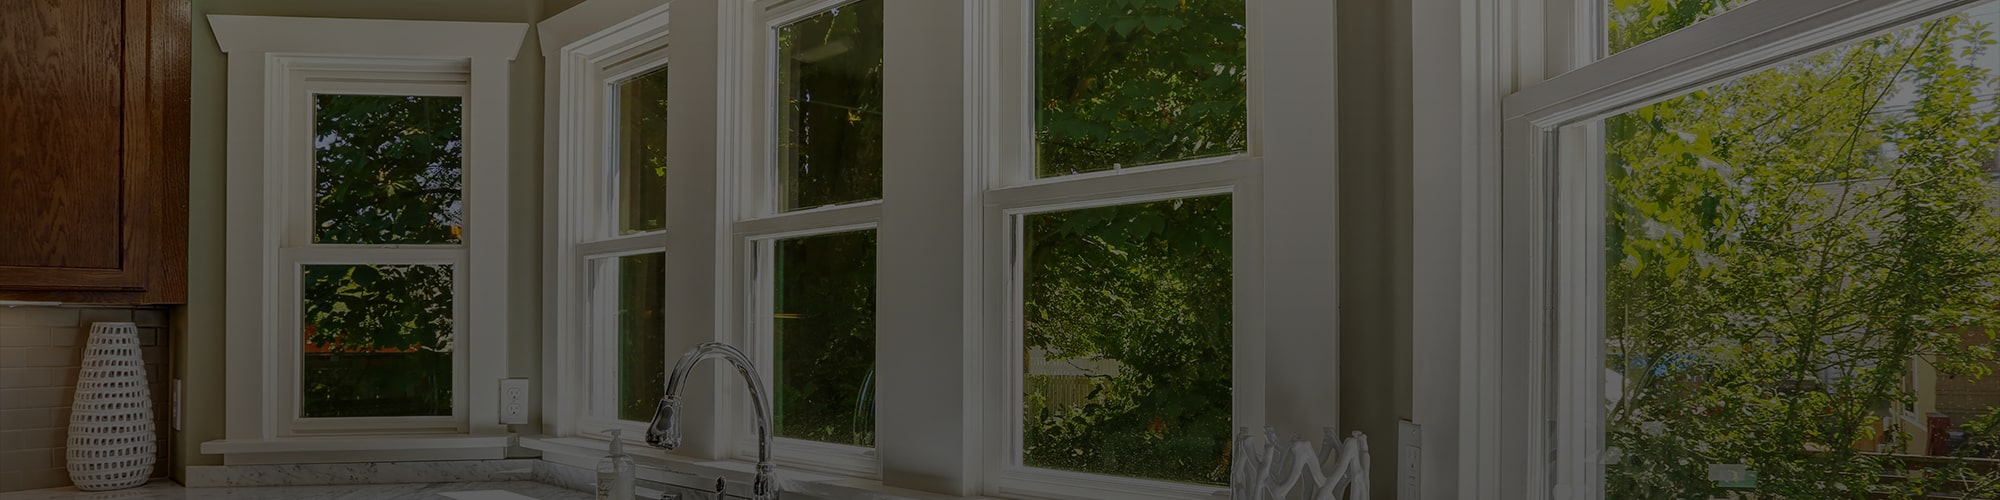 Get financing for your next window project through Premier 